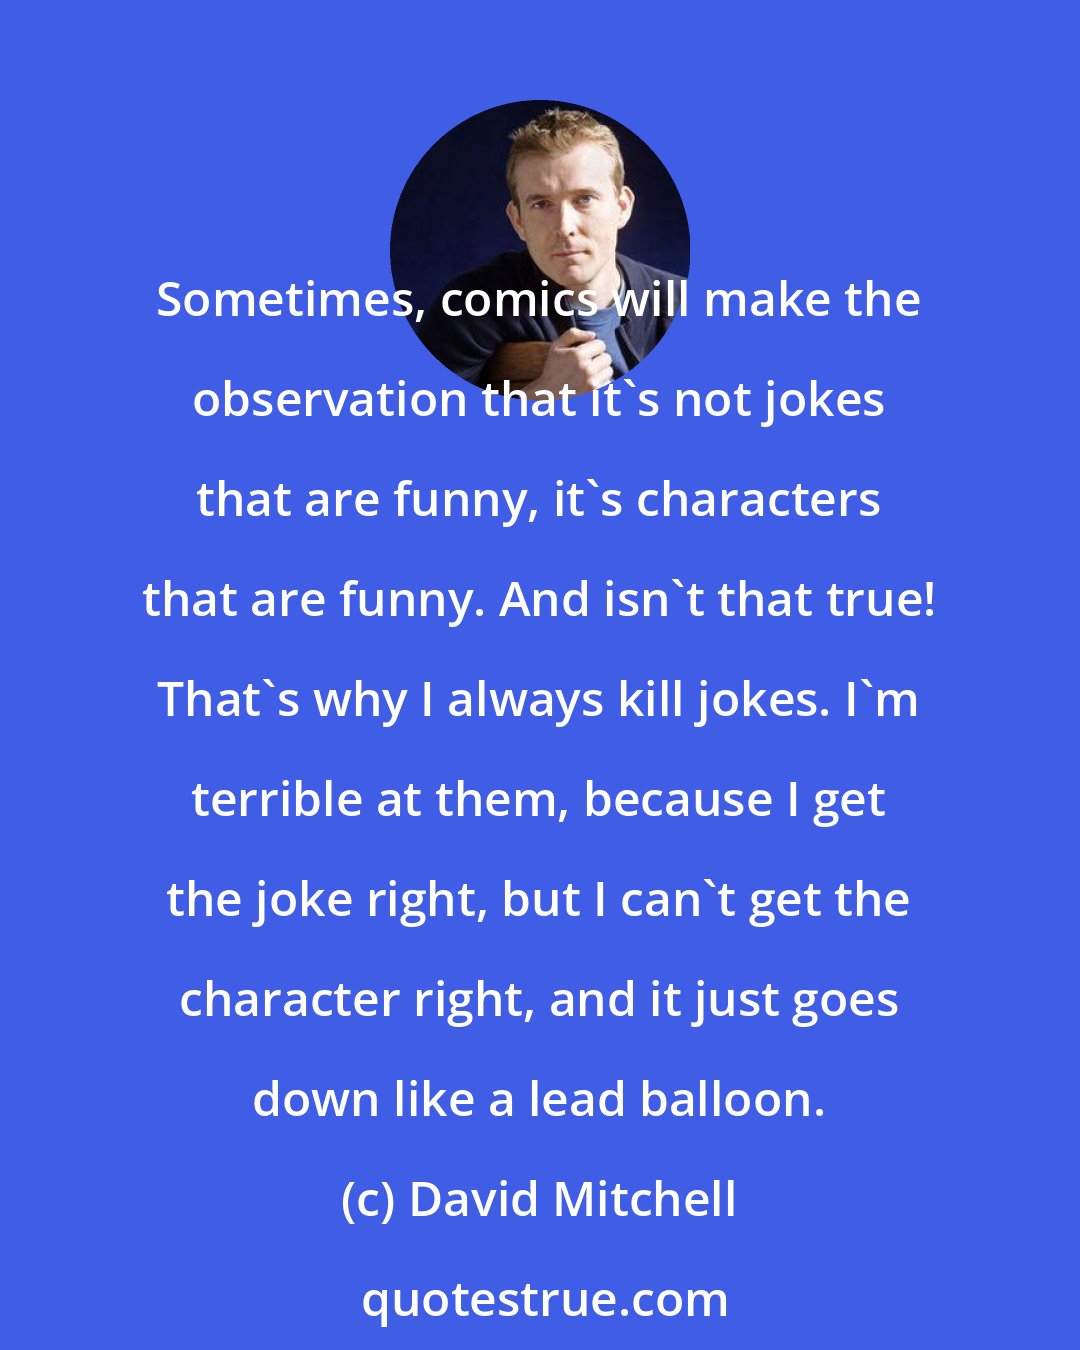 David Mitchell: Sometimes, comics will make the observation that it's not jokes that are funny, it's characters that are funny. And isn't that true! That's why I always kill jokes. I'm terrible at them, because I get the joke right, but I can't get the character right, and it just goes down like a lead balloon.